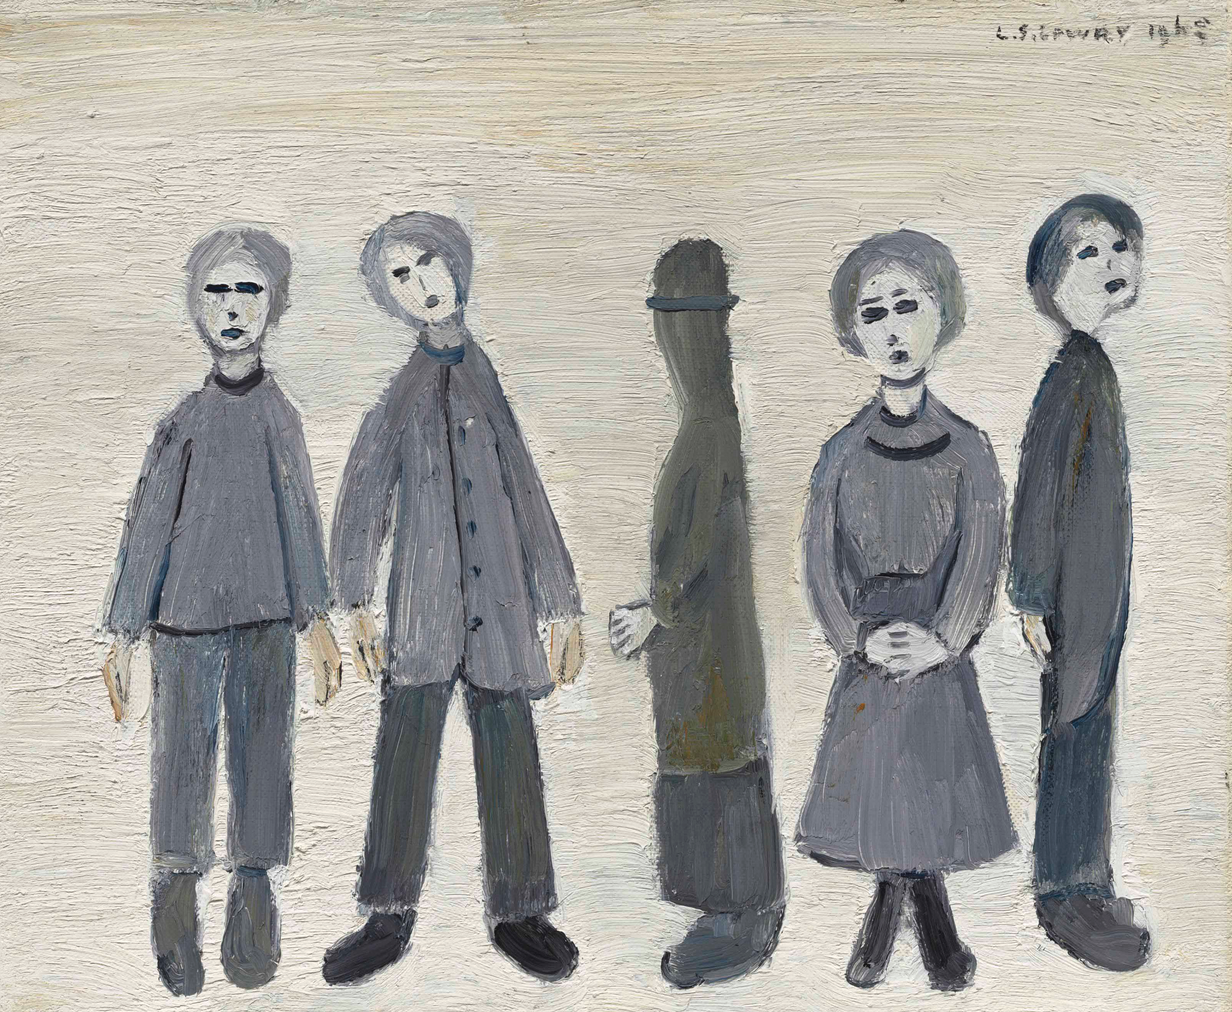 Five Figures in Grey (1965) by Laurence Stephen Lowry (1887 - 1976), English artist.